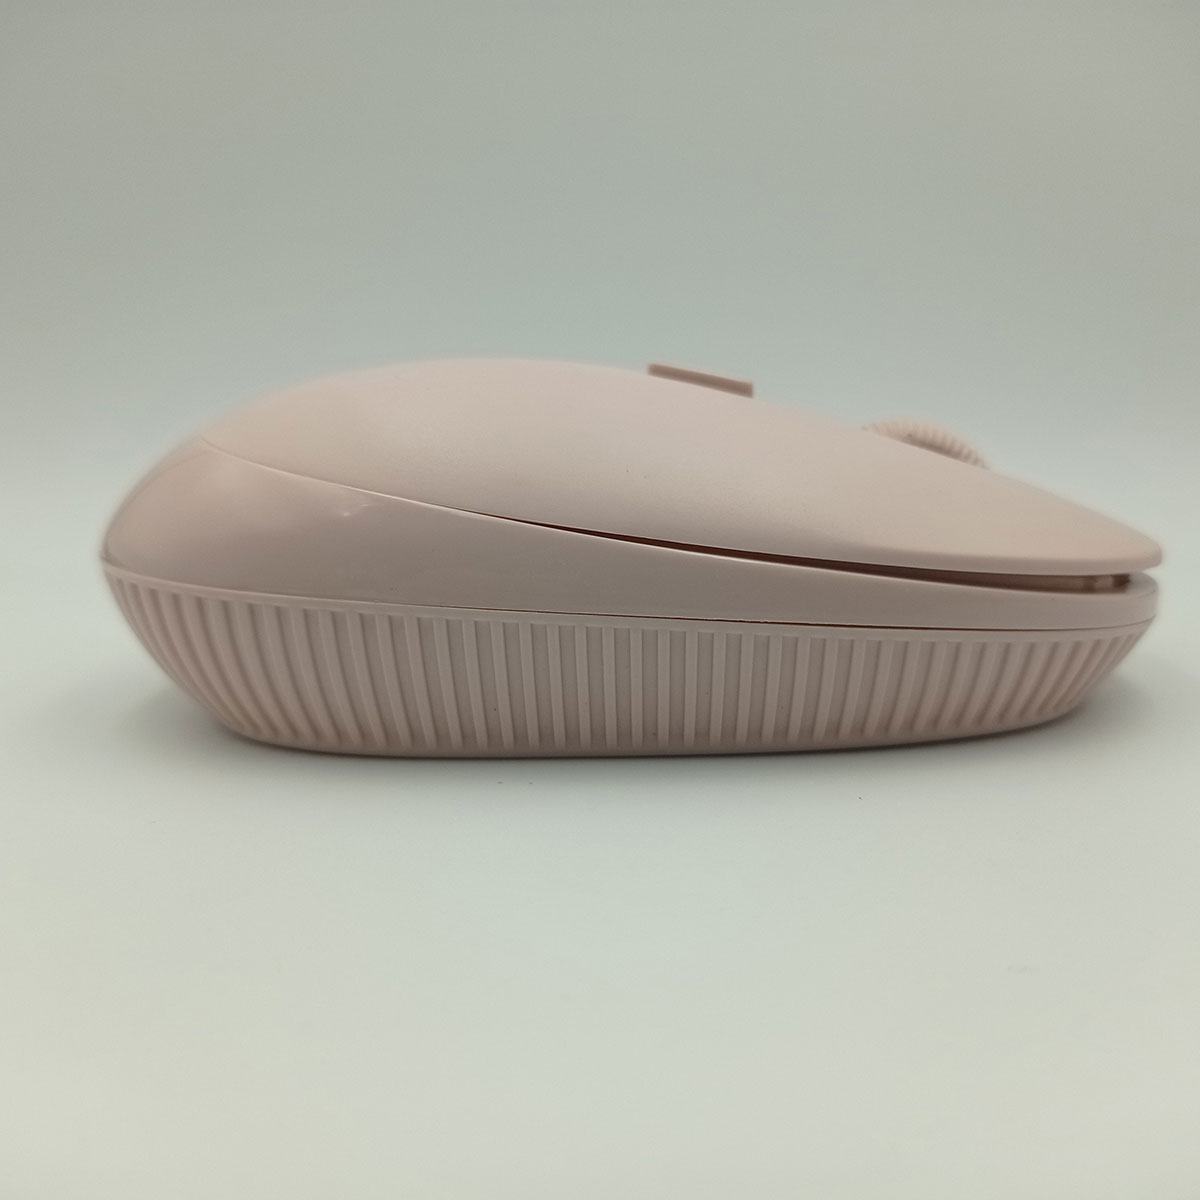 nm71-wireless-mouse-pink-03